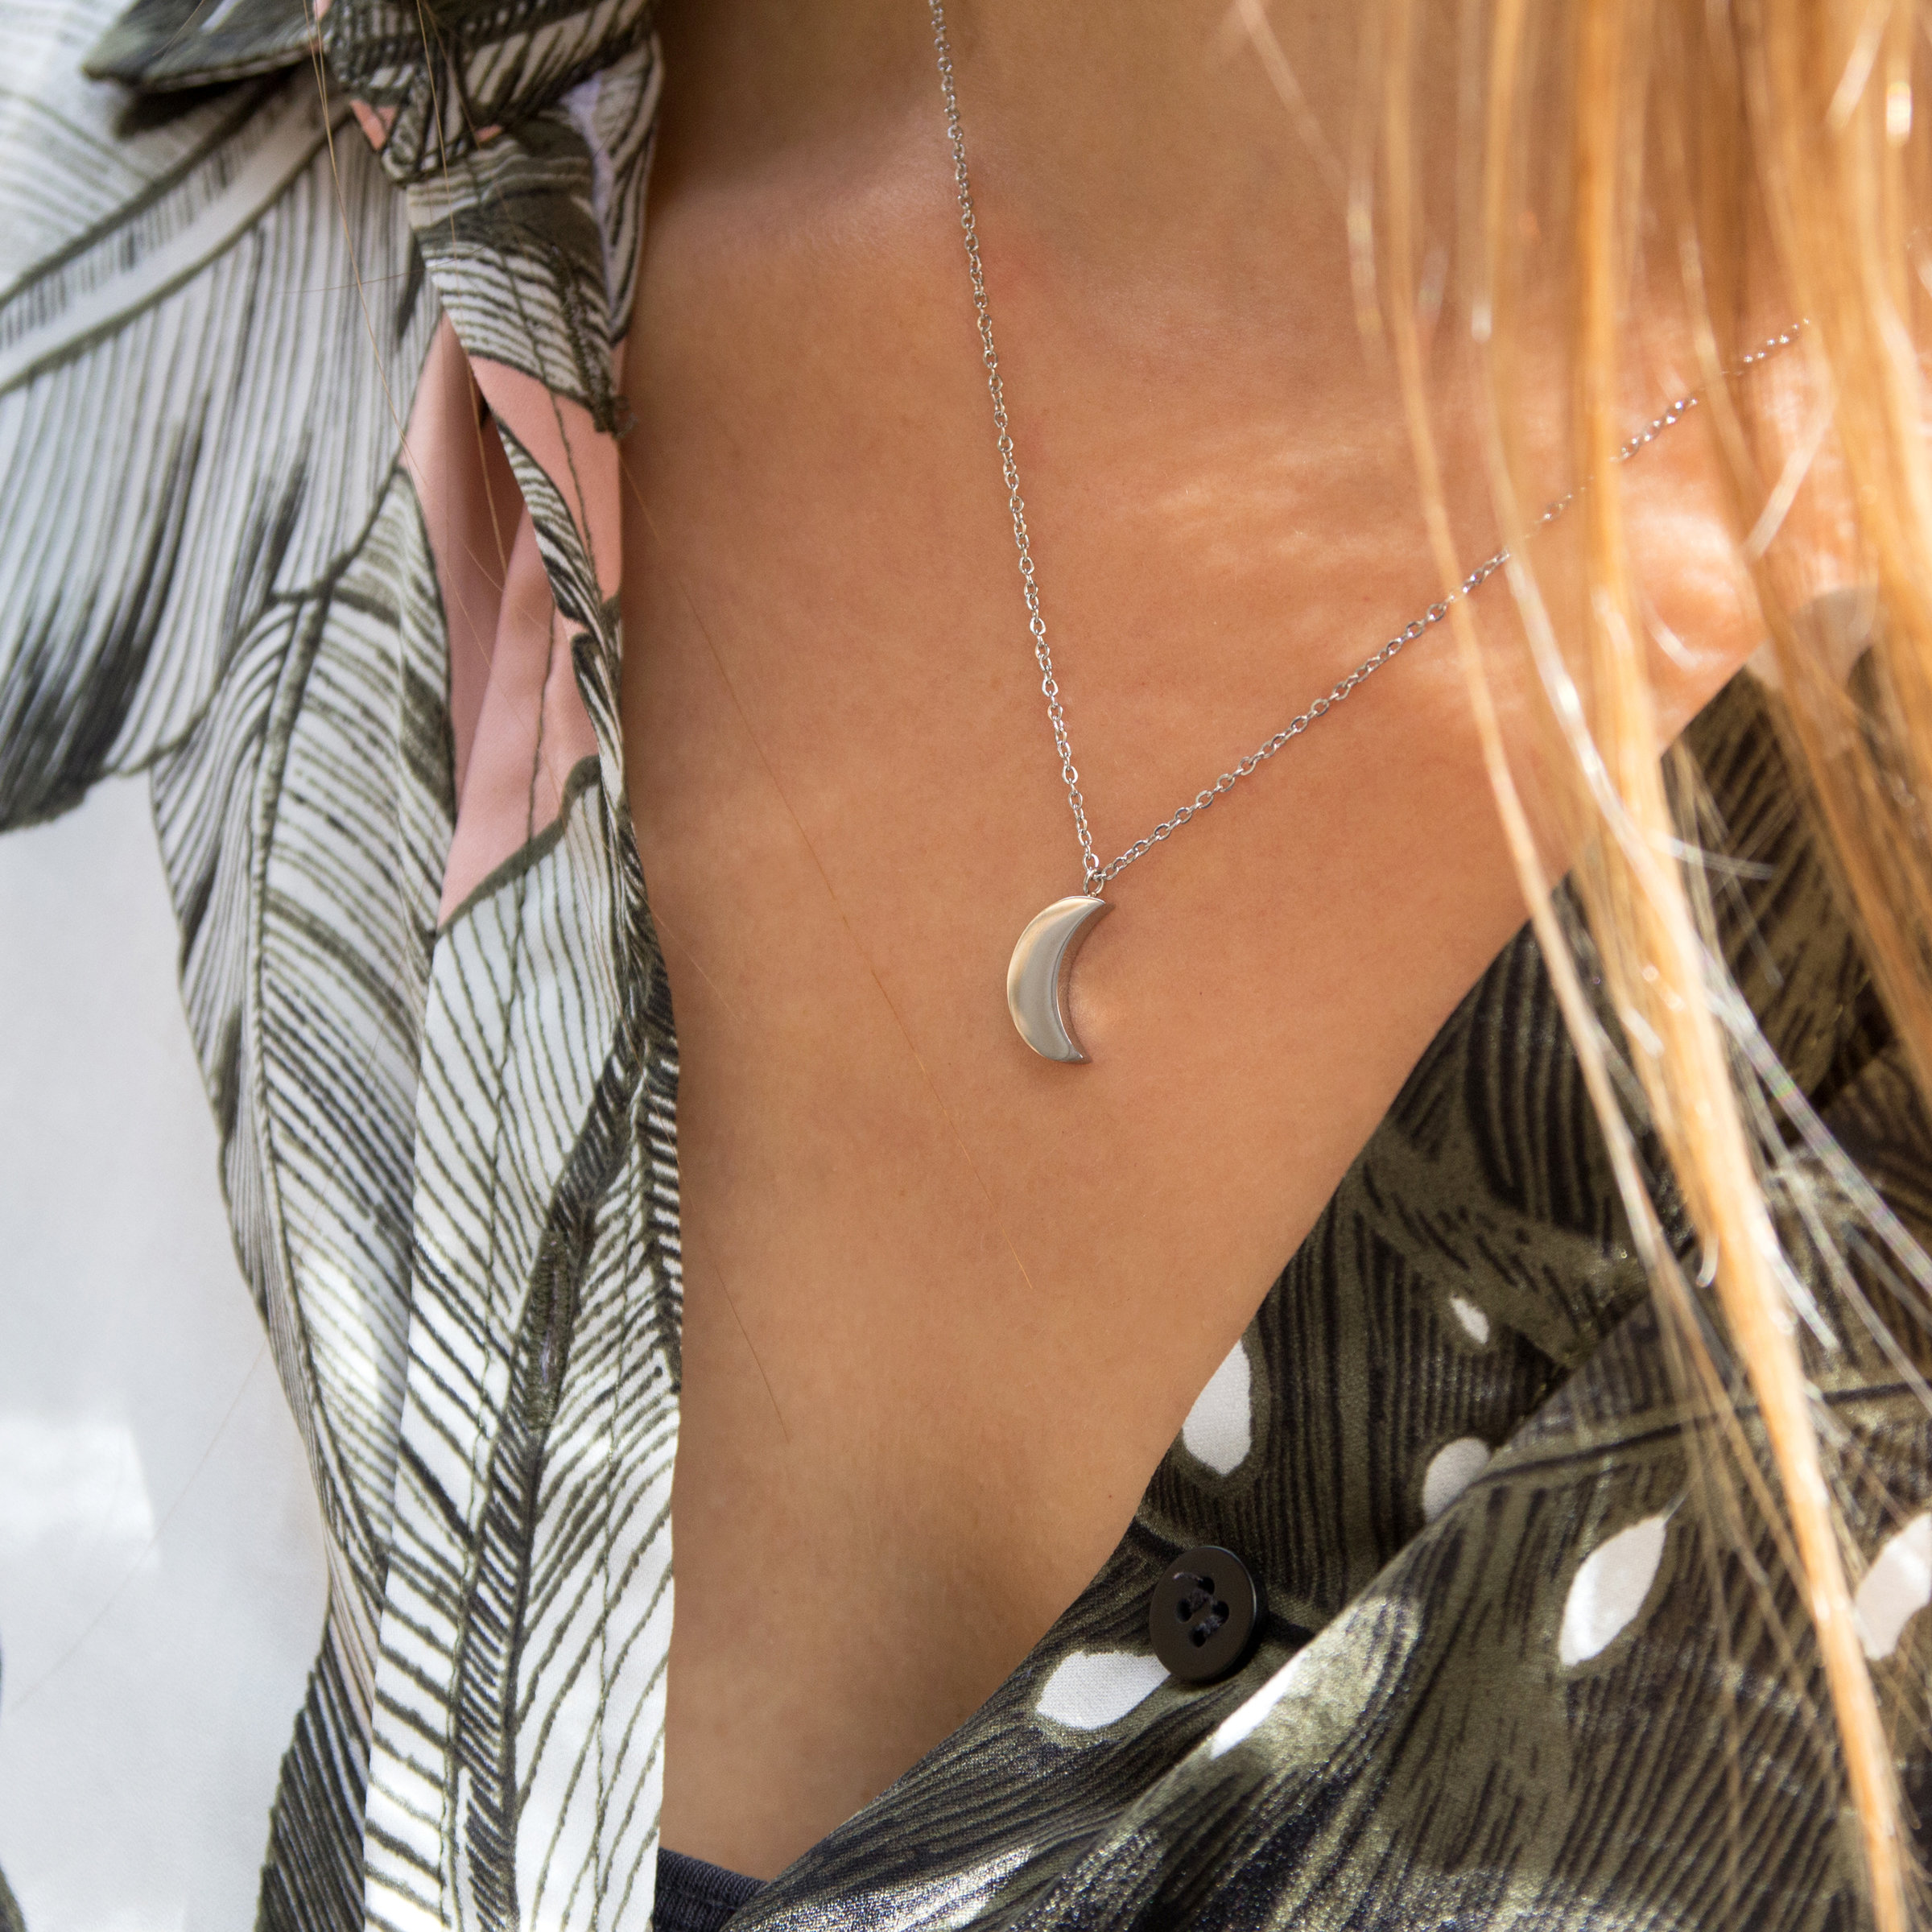 Kuku silver crescent moon necklace on model